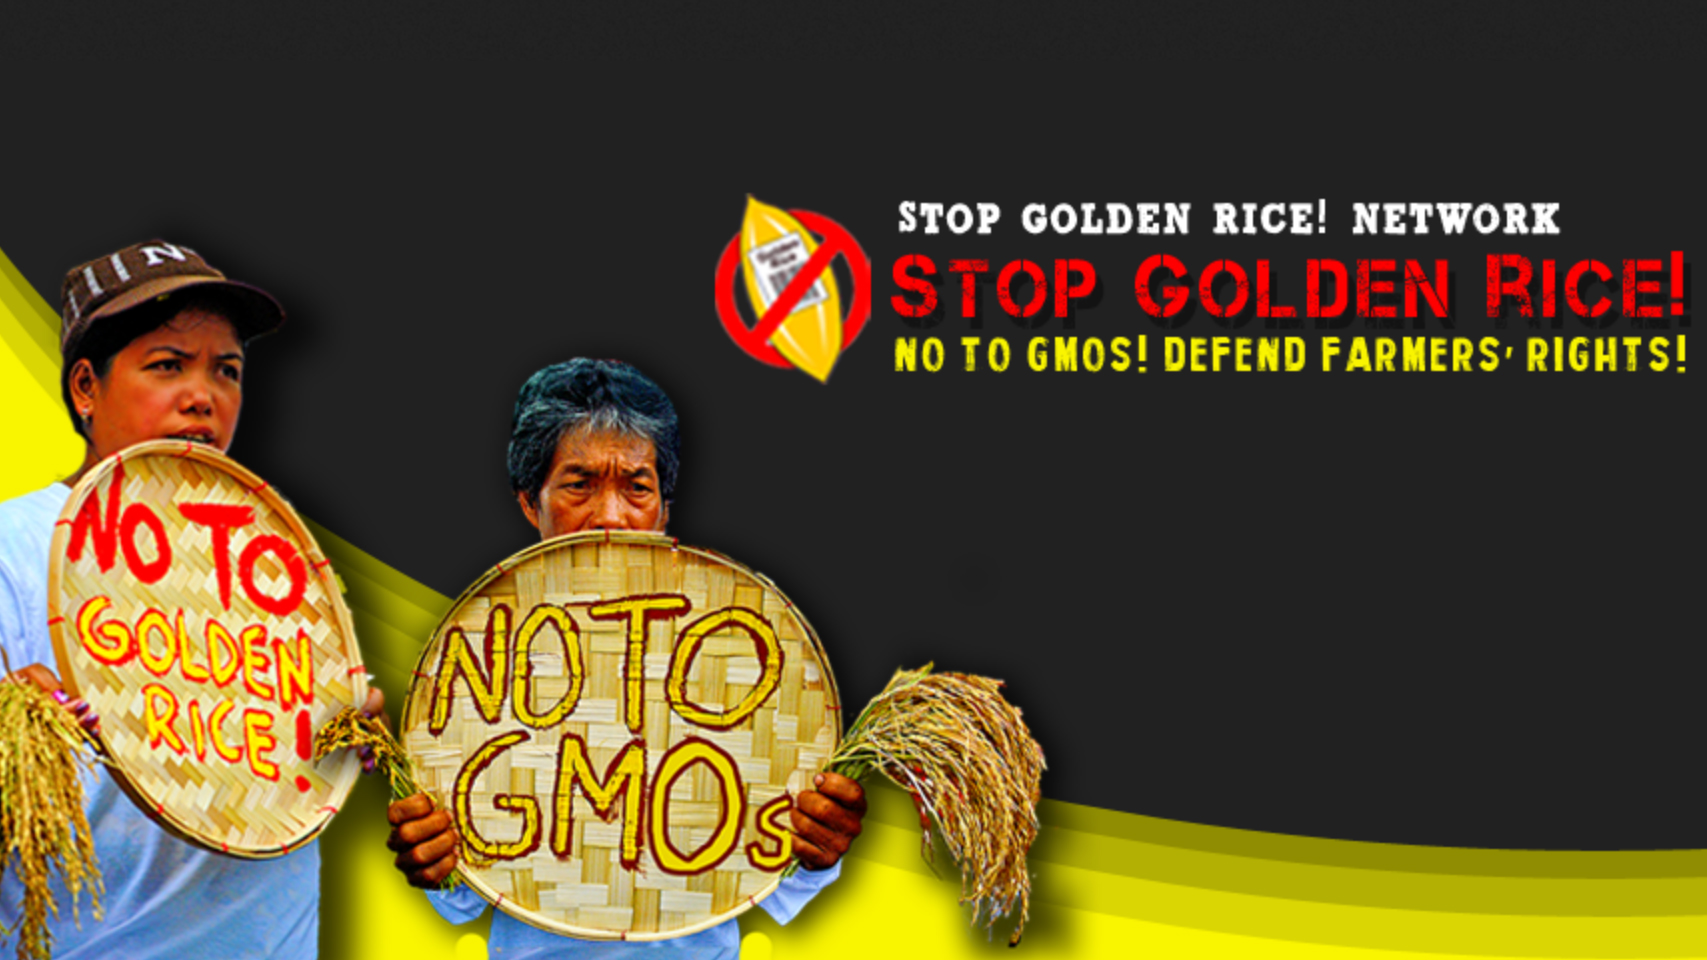 This picture is a campaign promotional graphic headed with some text saying “Stop Golden Rice! Network; Stop Golden Rice! No to GMOs! Defend Farmers Rights!” There is a logo depicting a single gold rice grain with a label on it saying “Golden Rice” and a bar code, encircled with a prohibition sign. There are also 2 Indigenous farmers each holding a threshing basket and a clump of freshly harvested rice. One basket has text saying “No to Golden Rice” and the other has text saying “No to GMOs”.